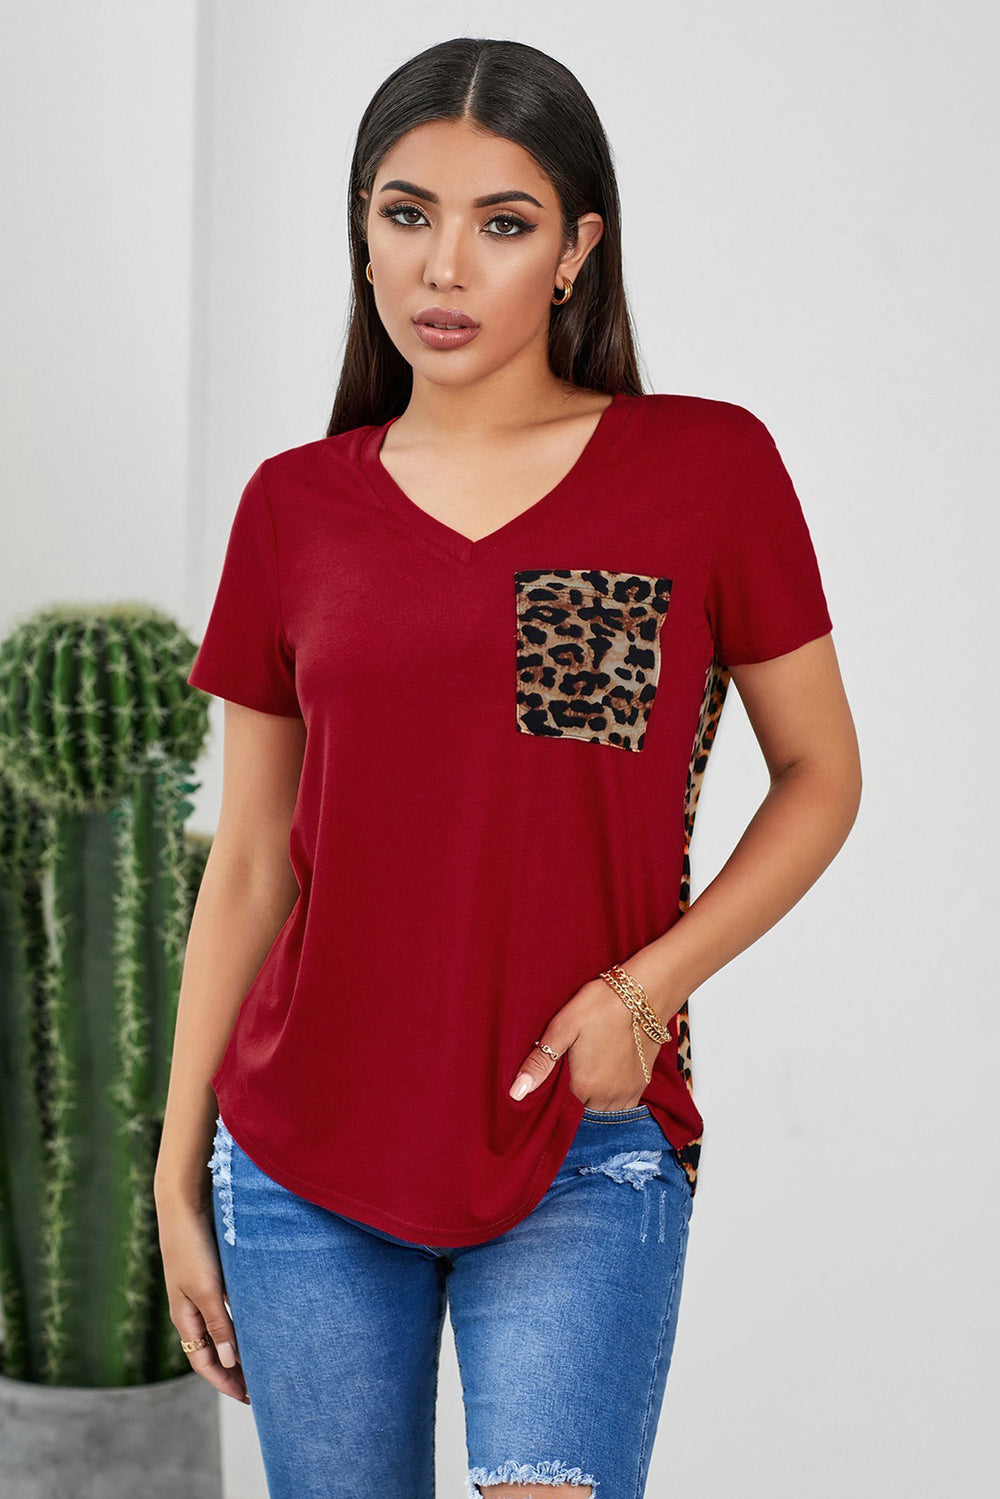 Red Leopard Printed Splicing Short Sleeve T-Shirt